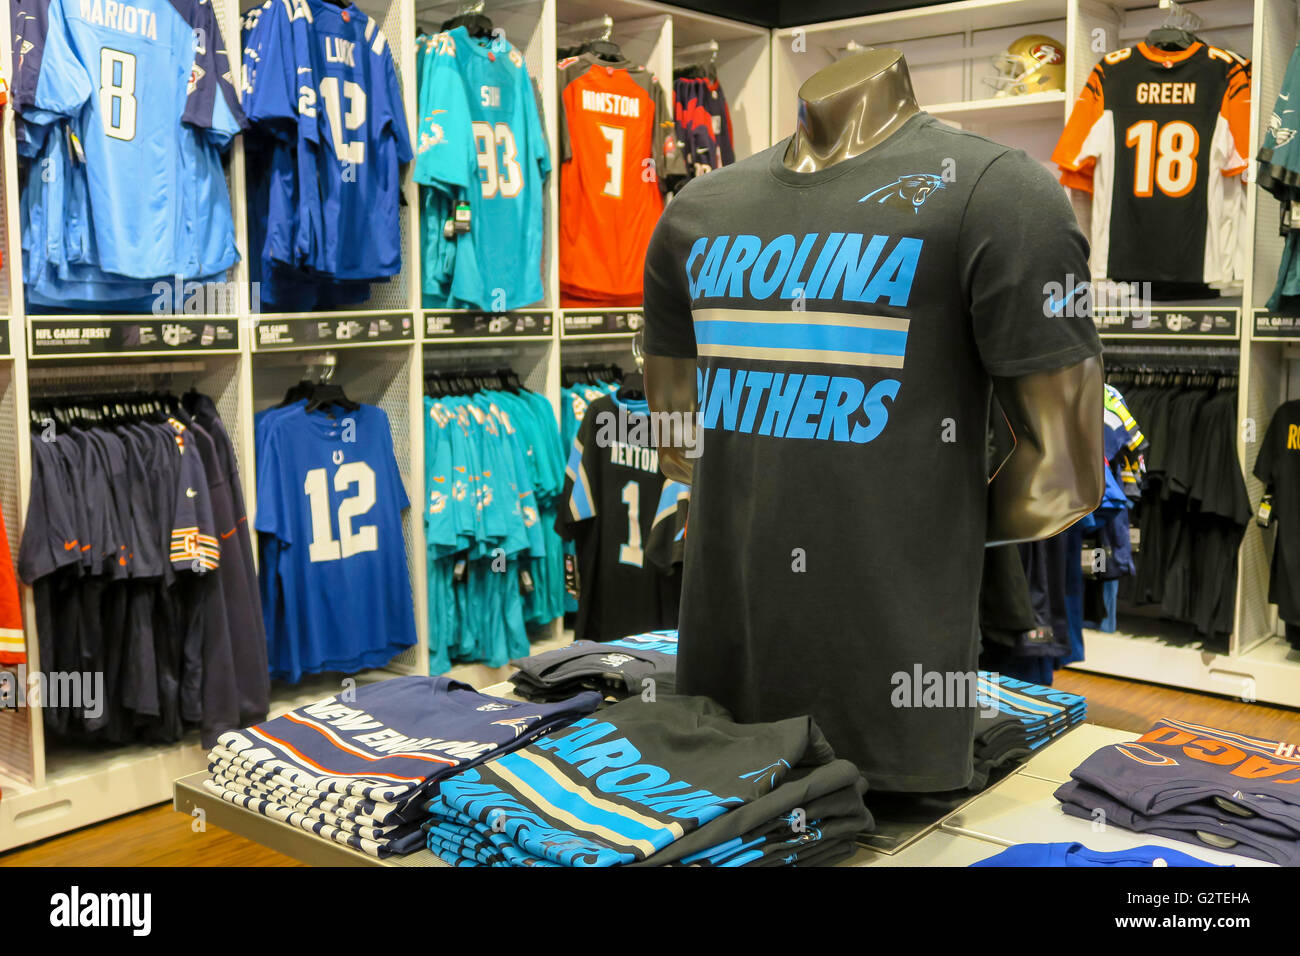 Sports Bras Display, Modell's Sporting Goods Store Interior, NYC Stock  Photo - Alamy